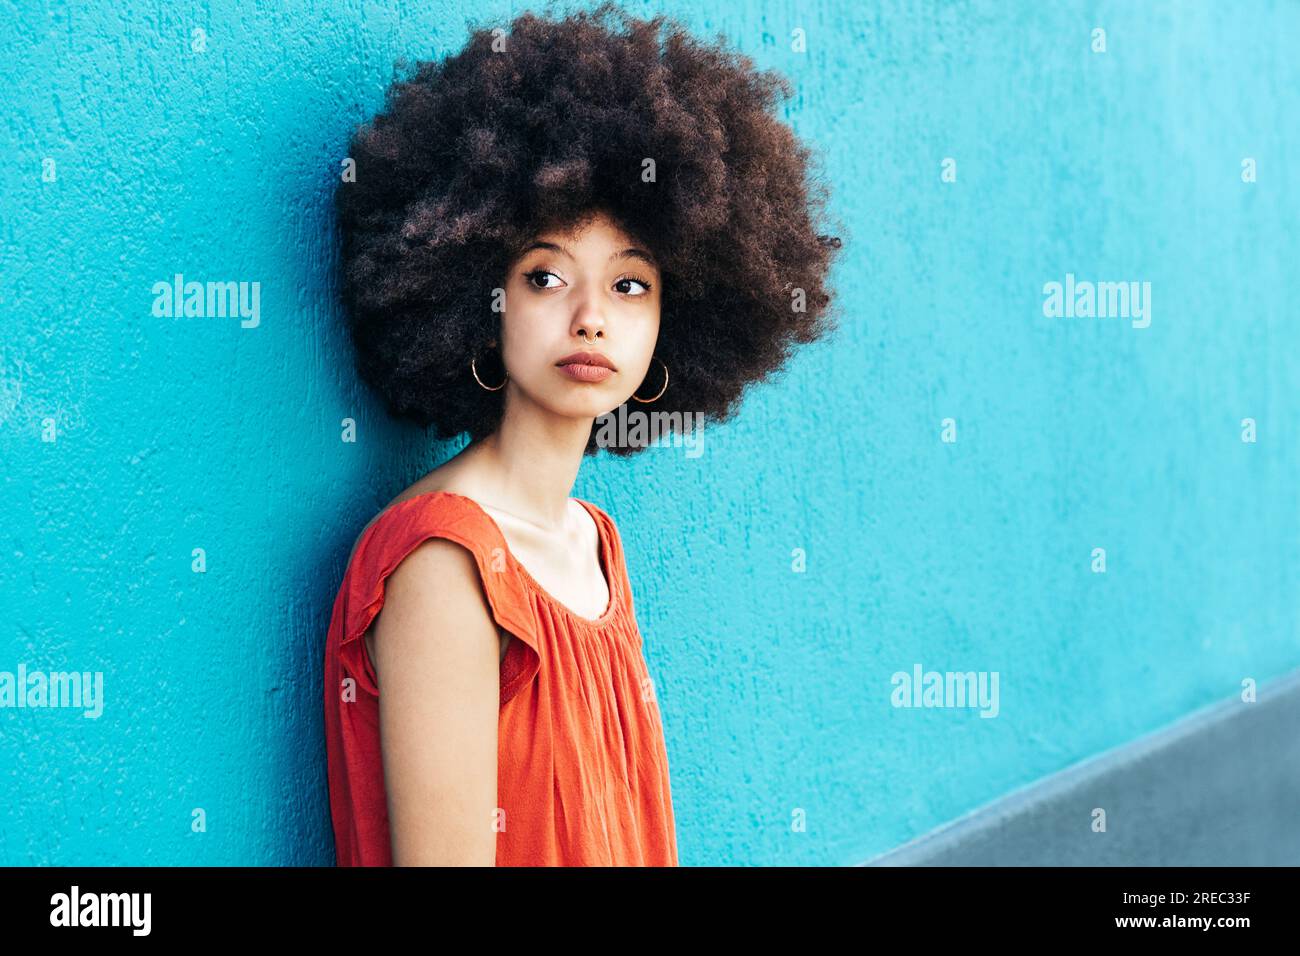 Side view portrait of young Moroccan female in casual cloth with Afro hairstyle looking at camera while standing against blue background Stock Photo